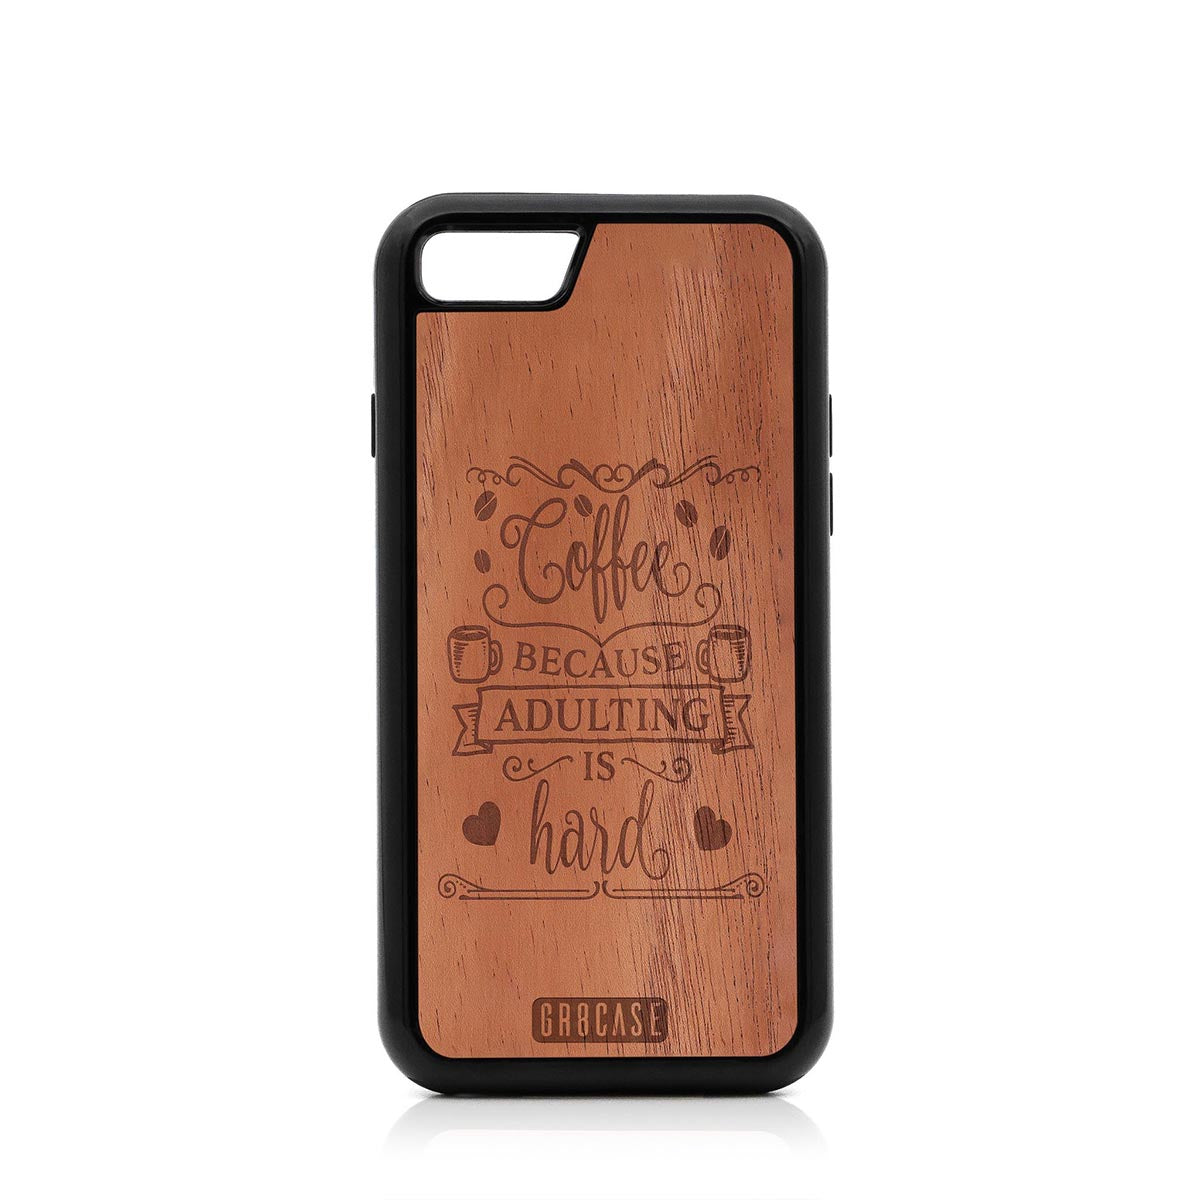 Coffee Because Adulting Is Hard Design Wood Case For iPhone 7/8 by GR8CASE